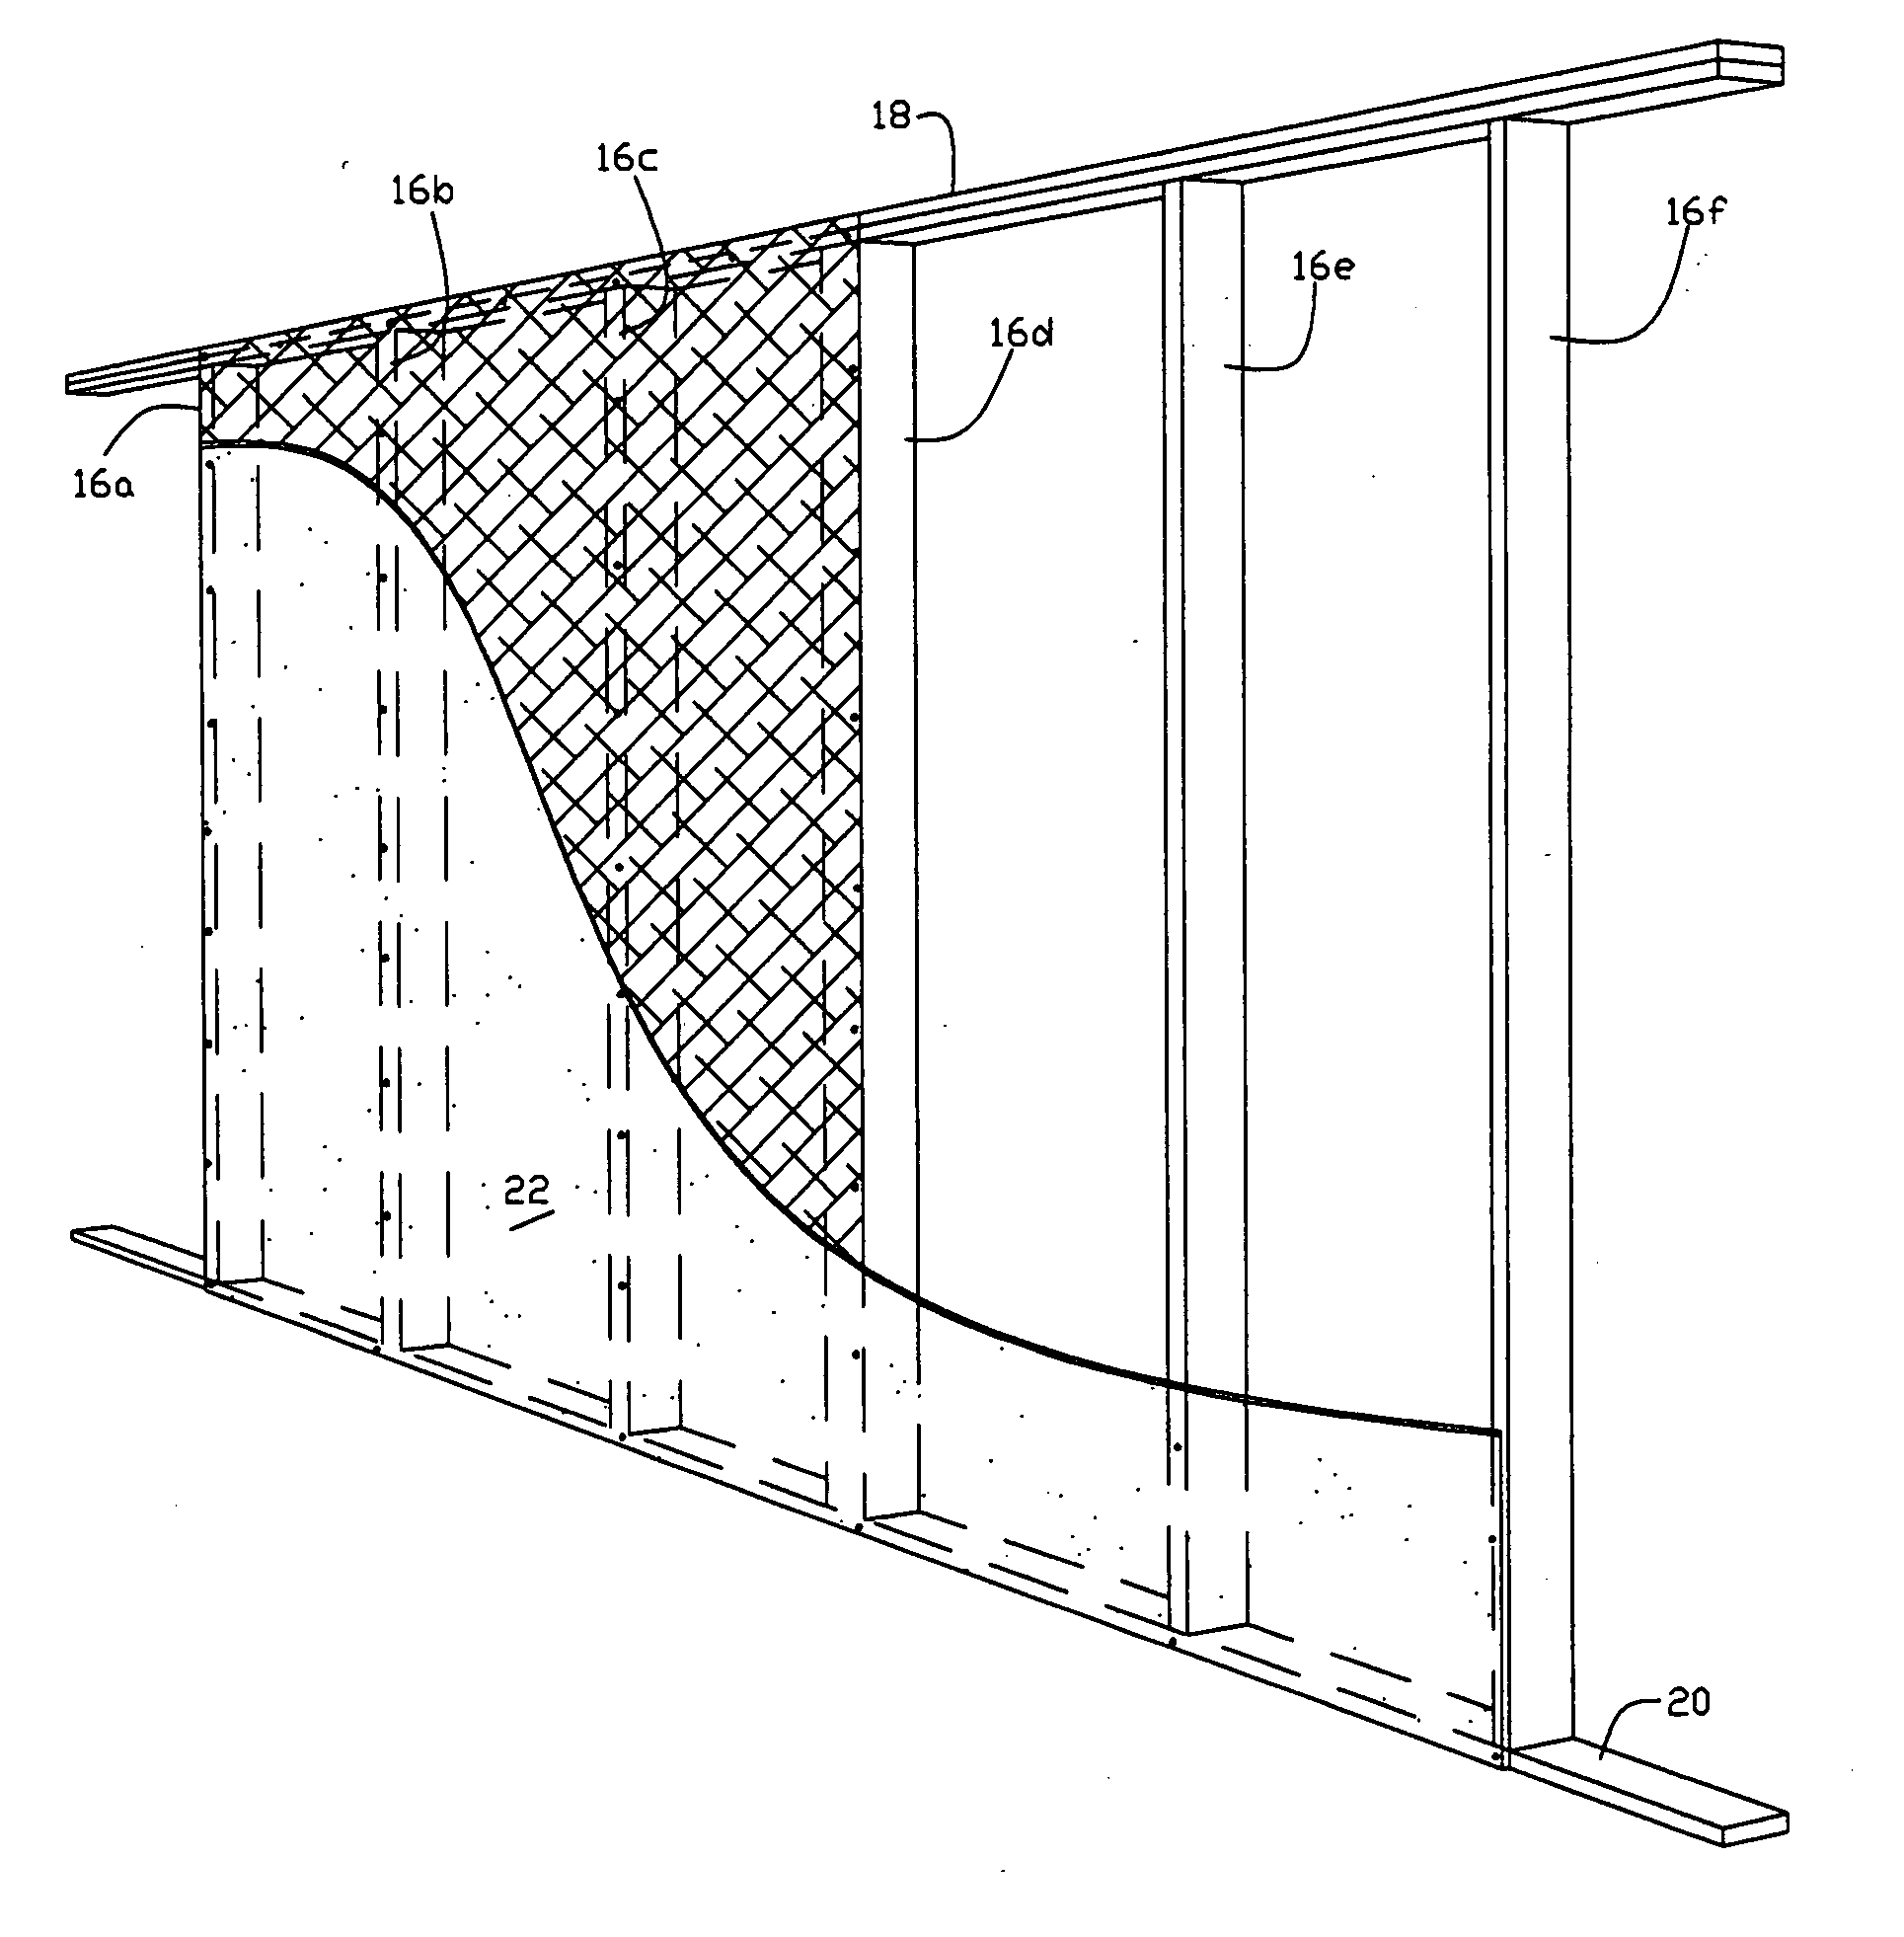 Method of framing a building shear wall structure compatible with conventional interior or exterior finishing materials and subsurface panel for use therewith